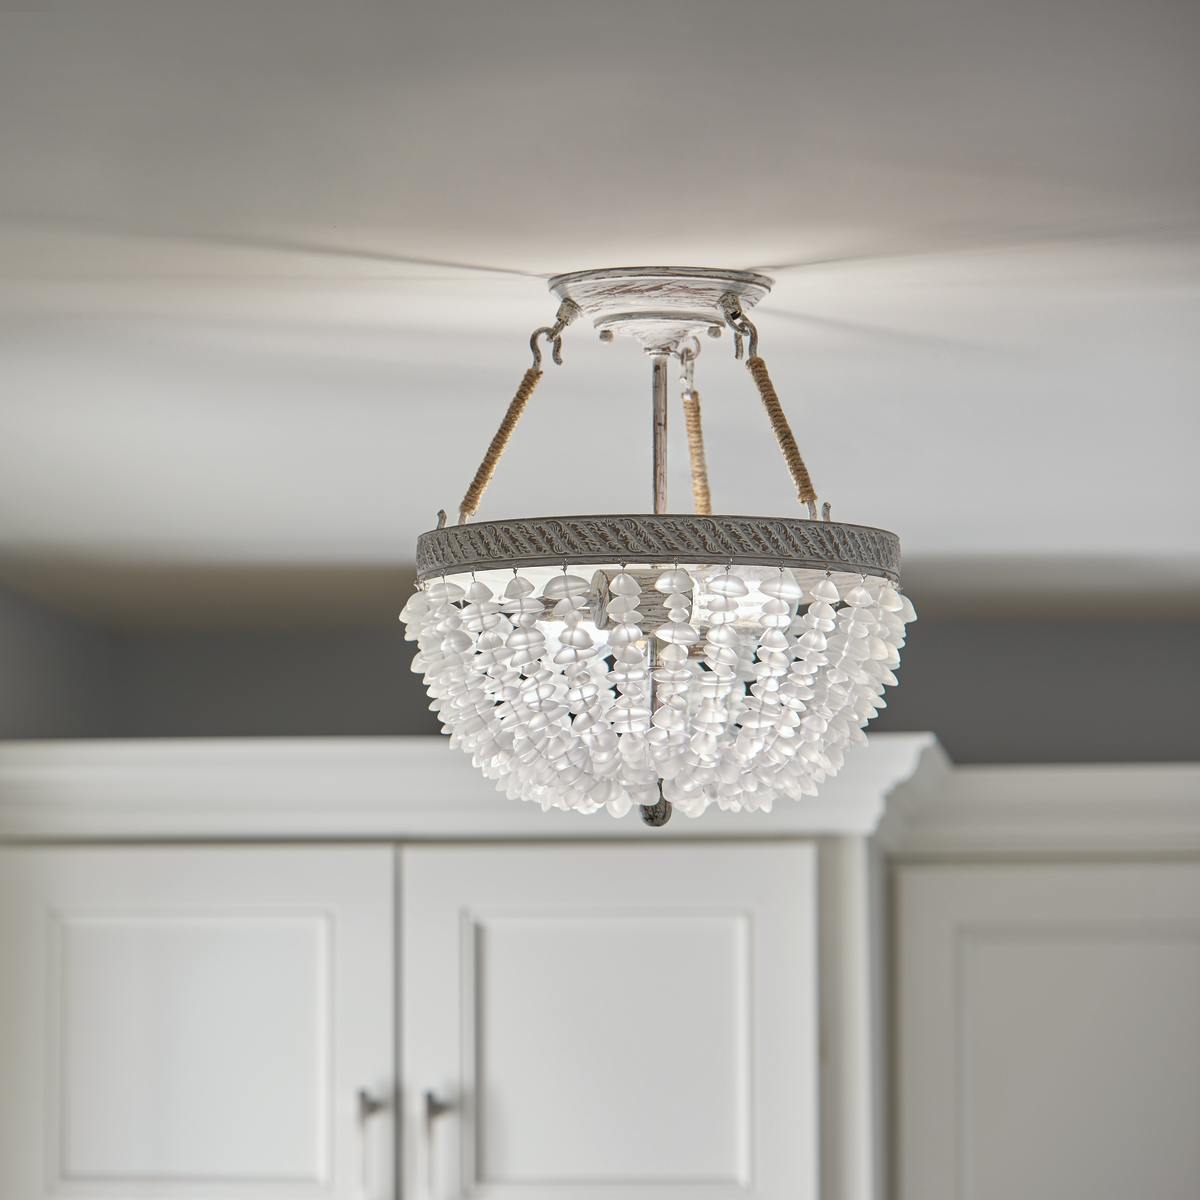 Close up view of the Kona Cay 12" Semi-flush Light in White on a white background